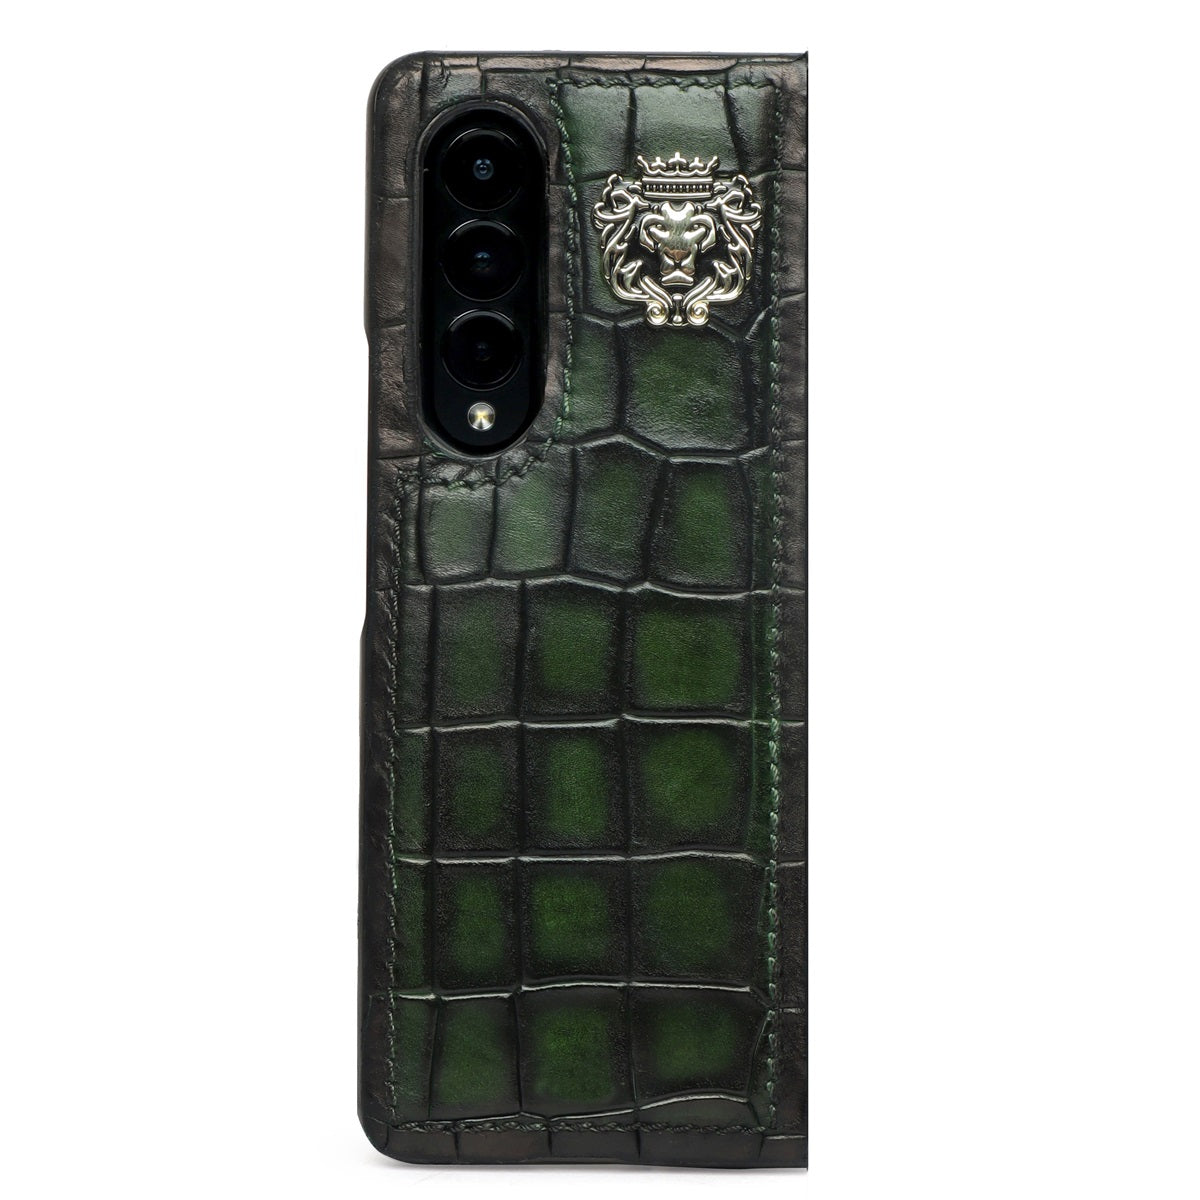 Smokey Finish Mobile Cover in Green Croco Textured Leather with Metal Lion